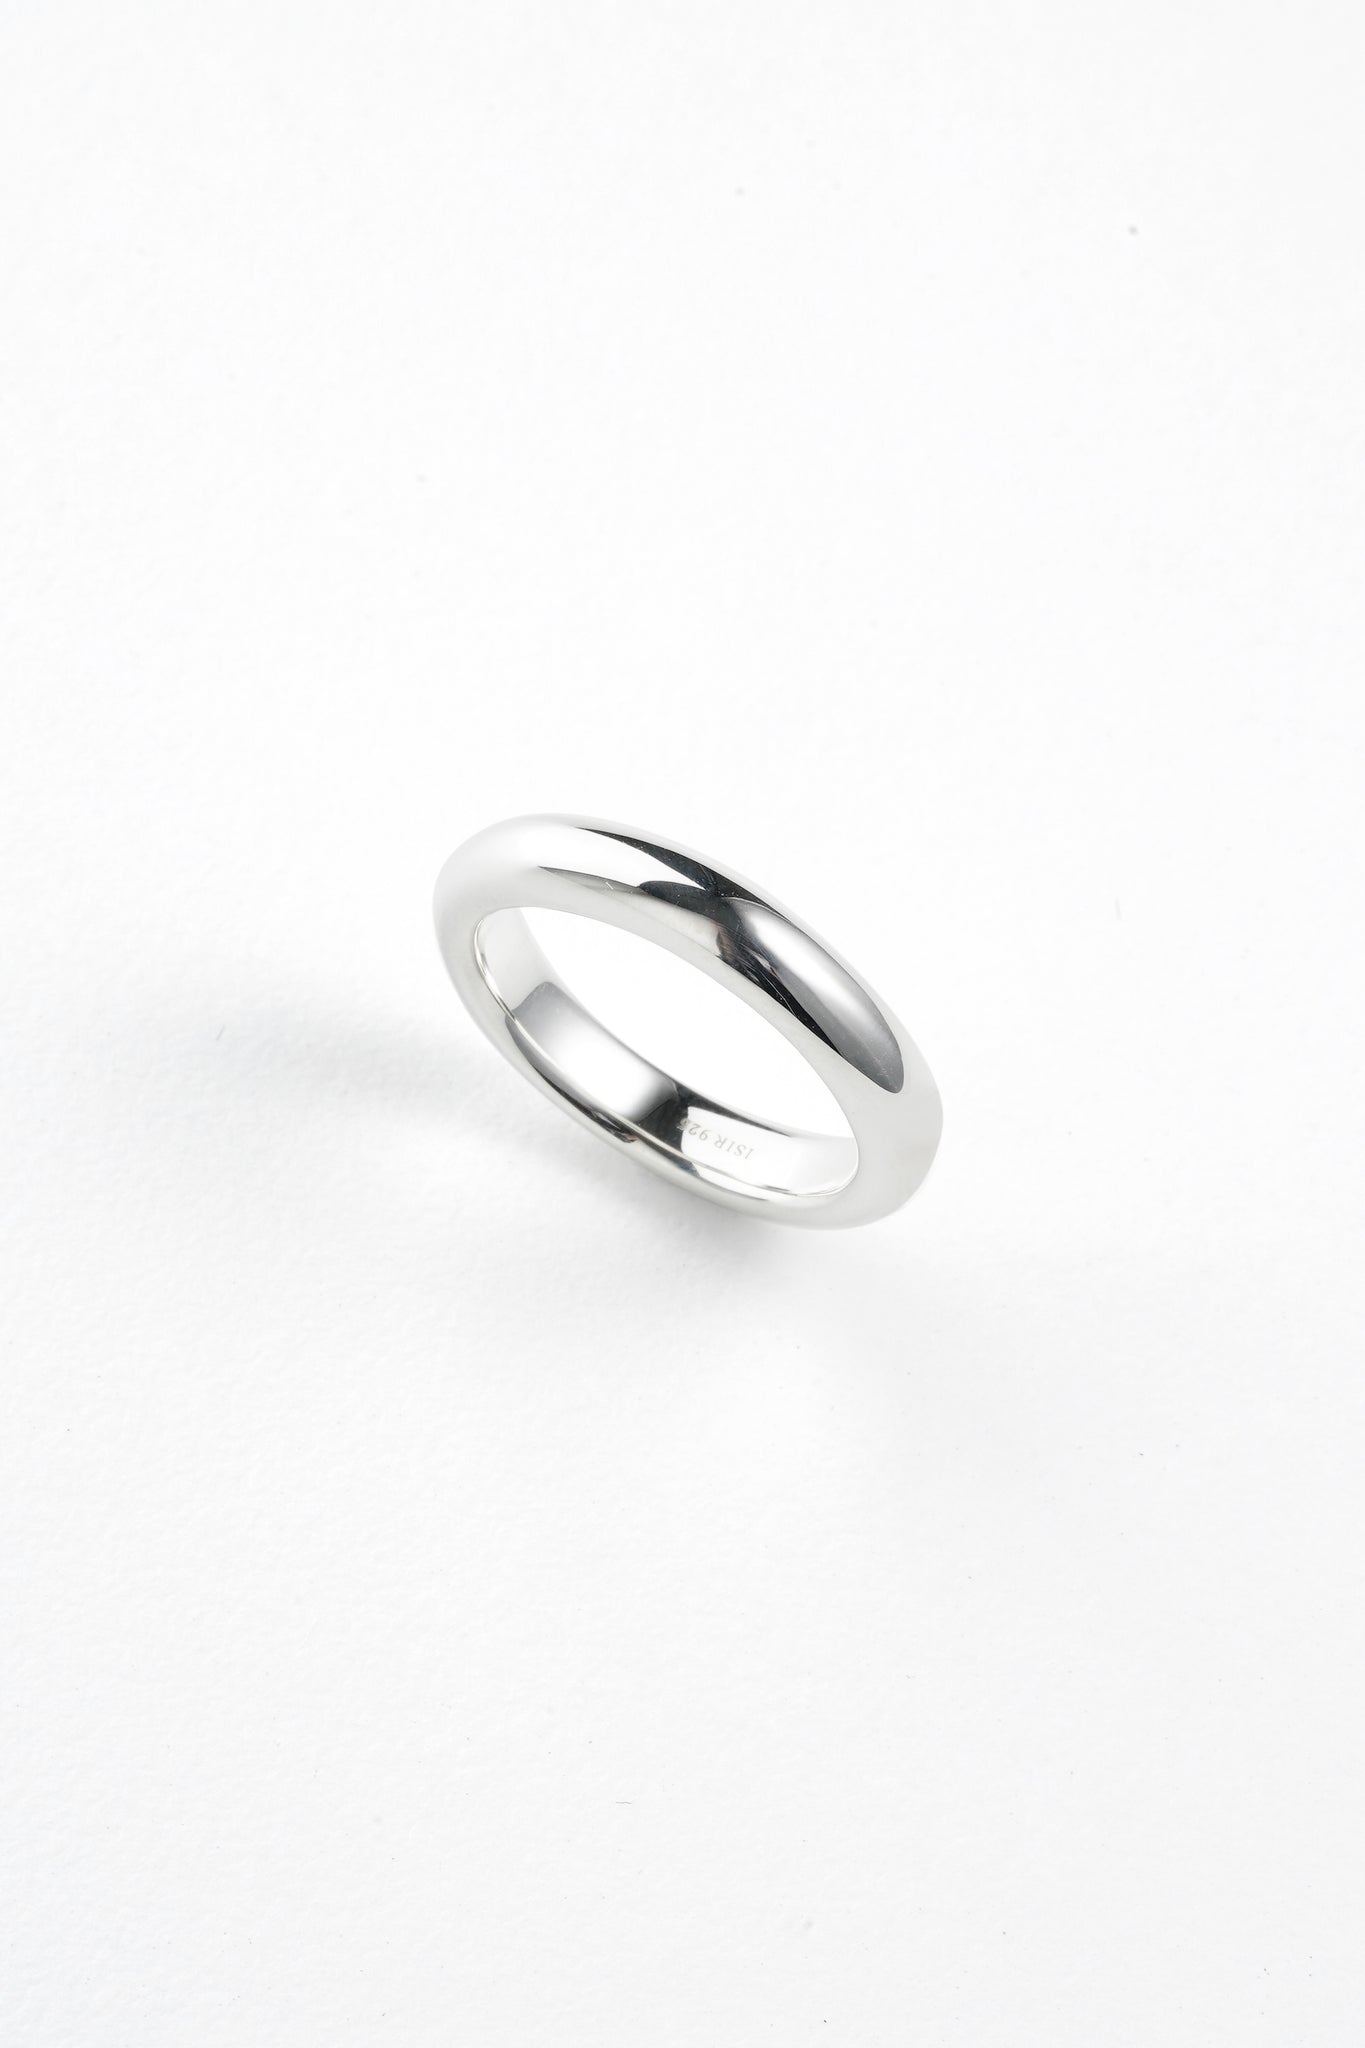 IN RING 4mm (SILVER925)